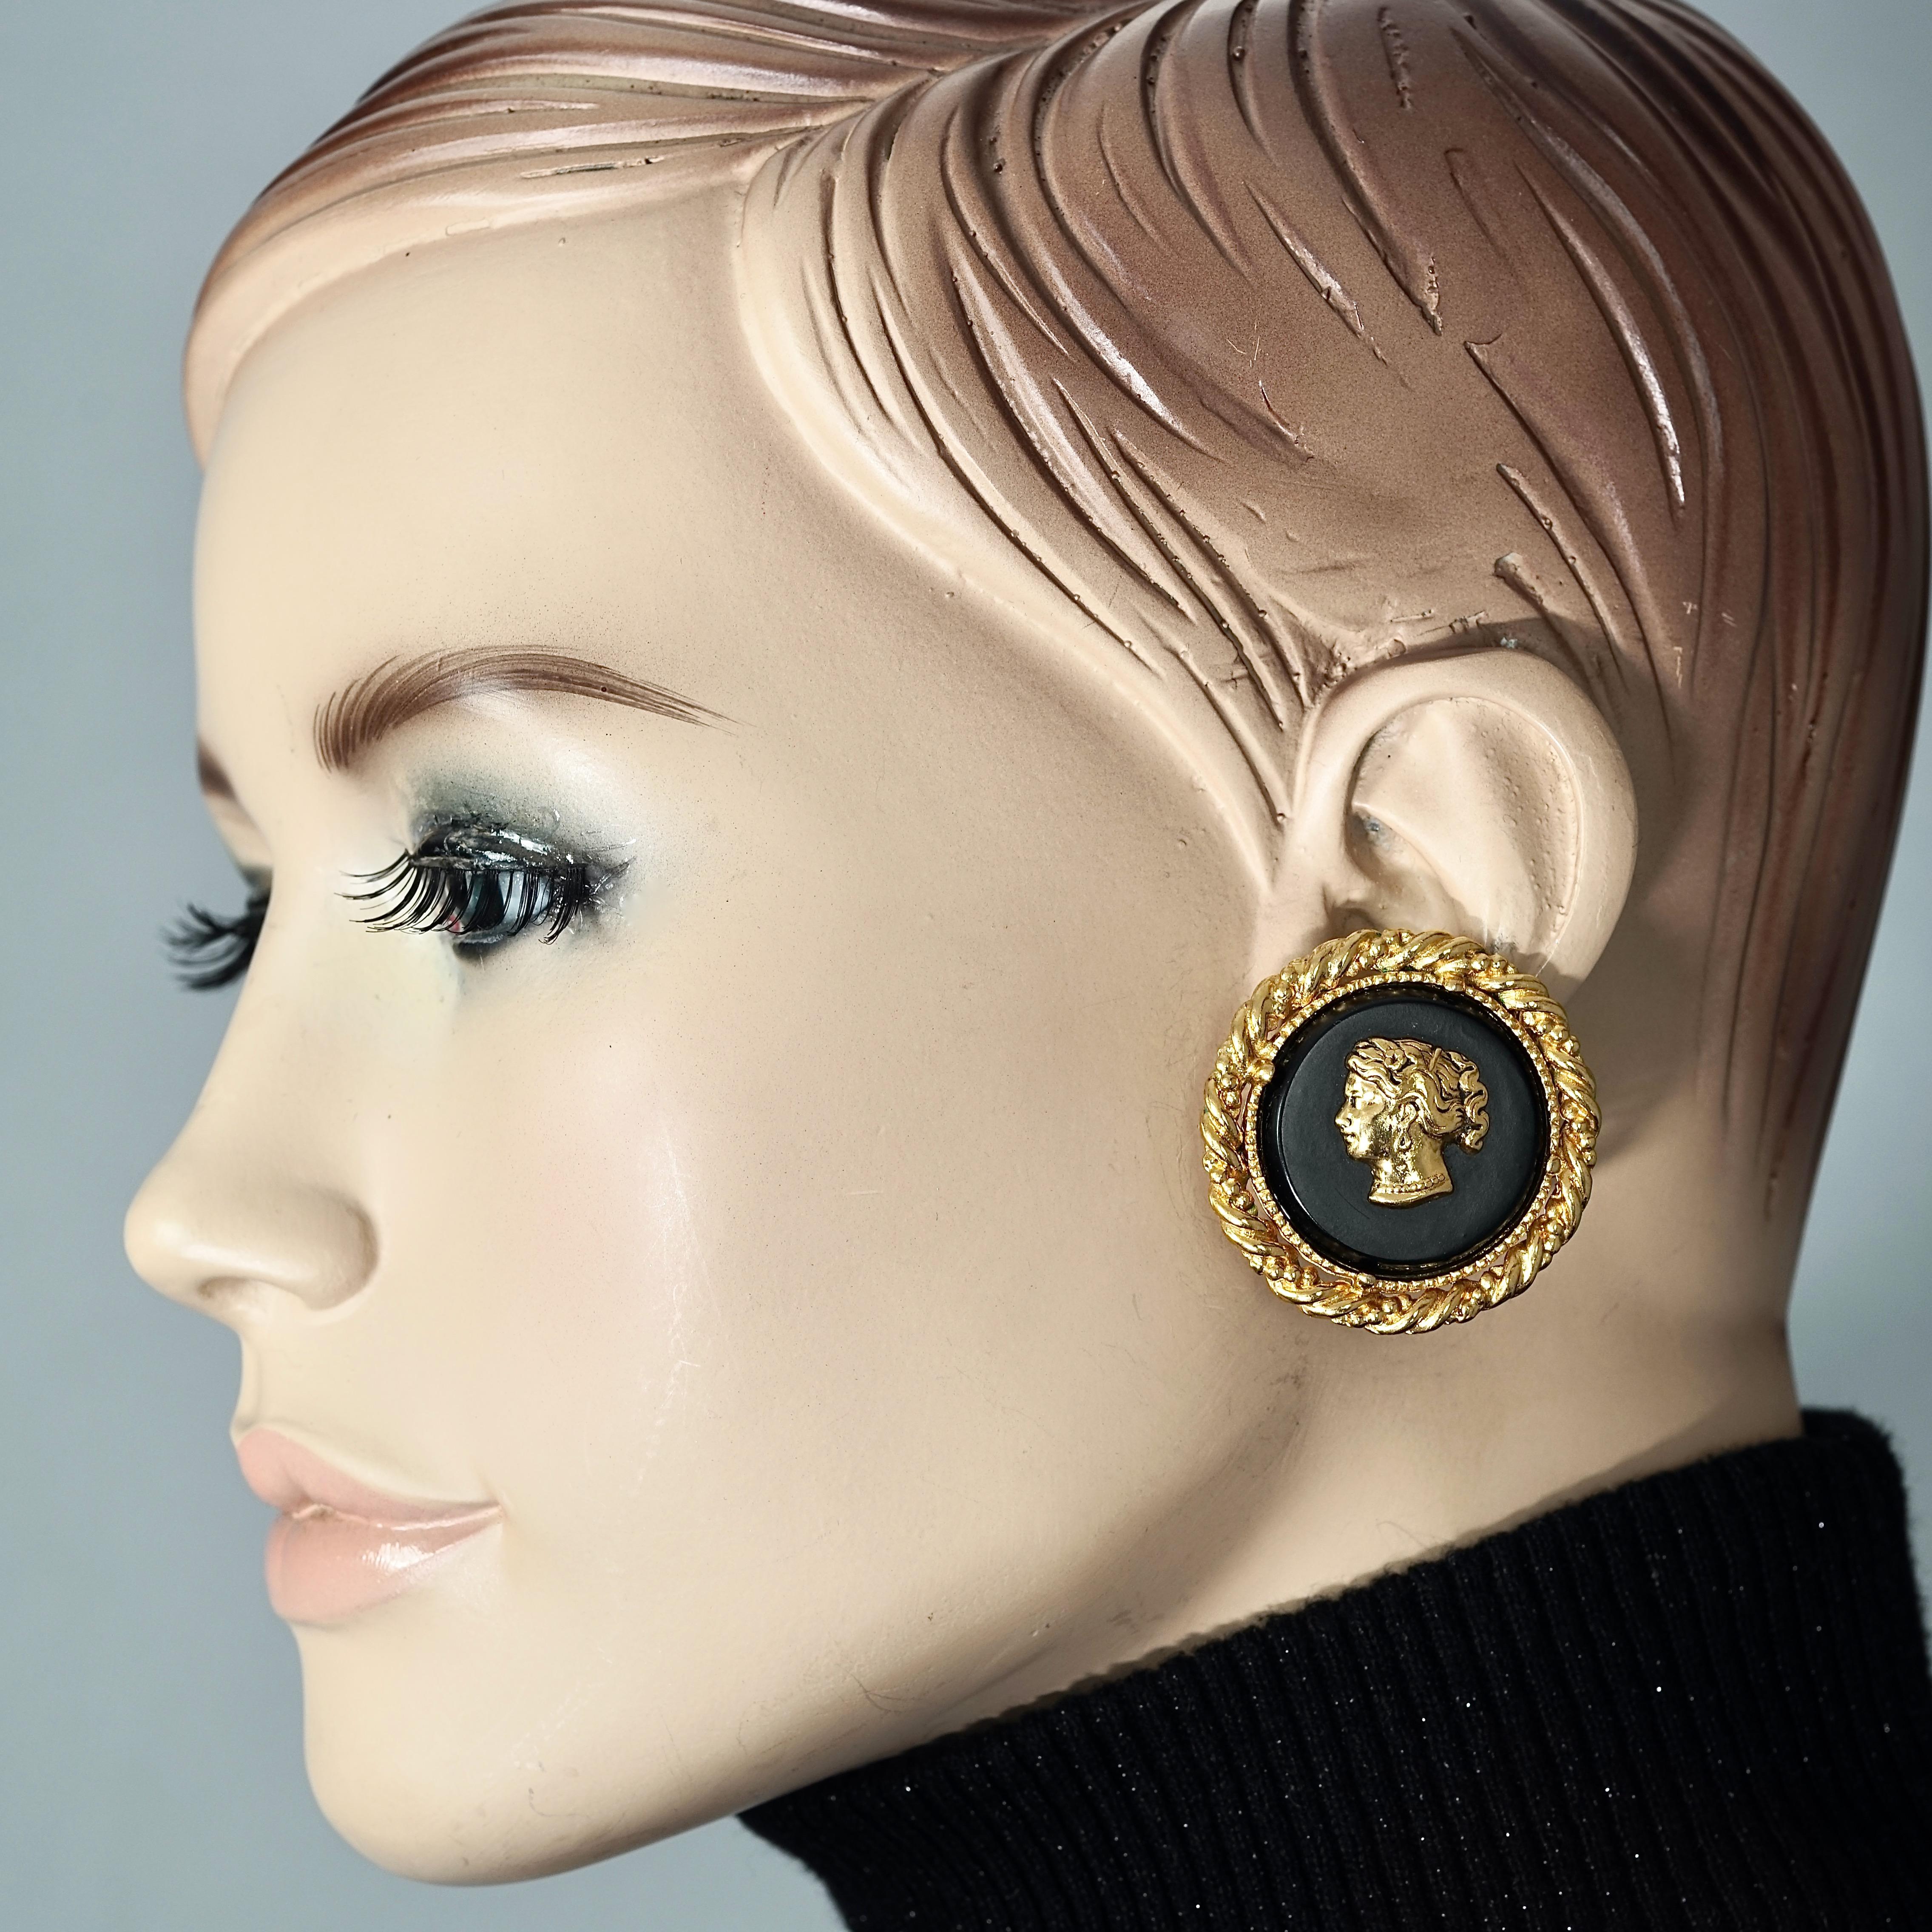 Vintage YVES SAINT LAURENT Ysl Cameo Lady Profile Earrings

Measurements:
Height: 1.57 inches (4 cm)
Width: 1.57 inches (4 cm)
Weight per Earring: 20 grams

Features:
- 100% Authentic YVES SAINT LAURENT.
- Raised metal lady cameo on black resin